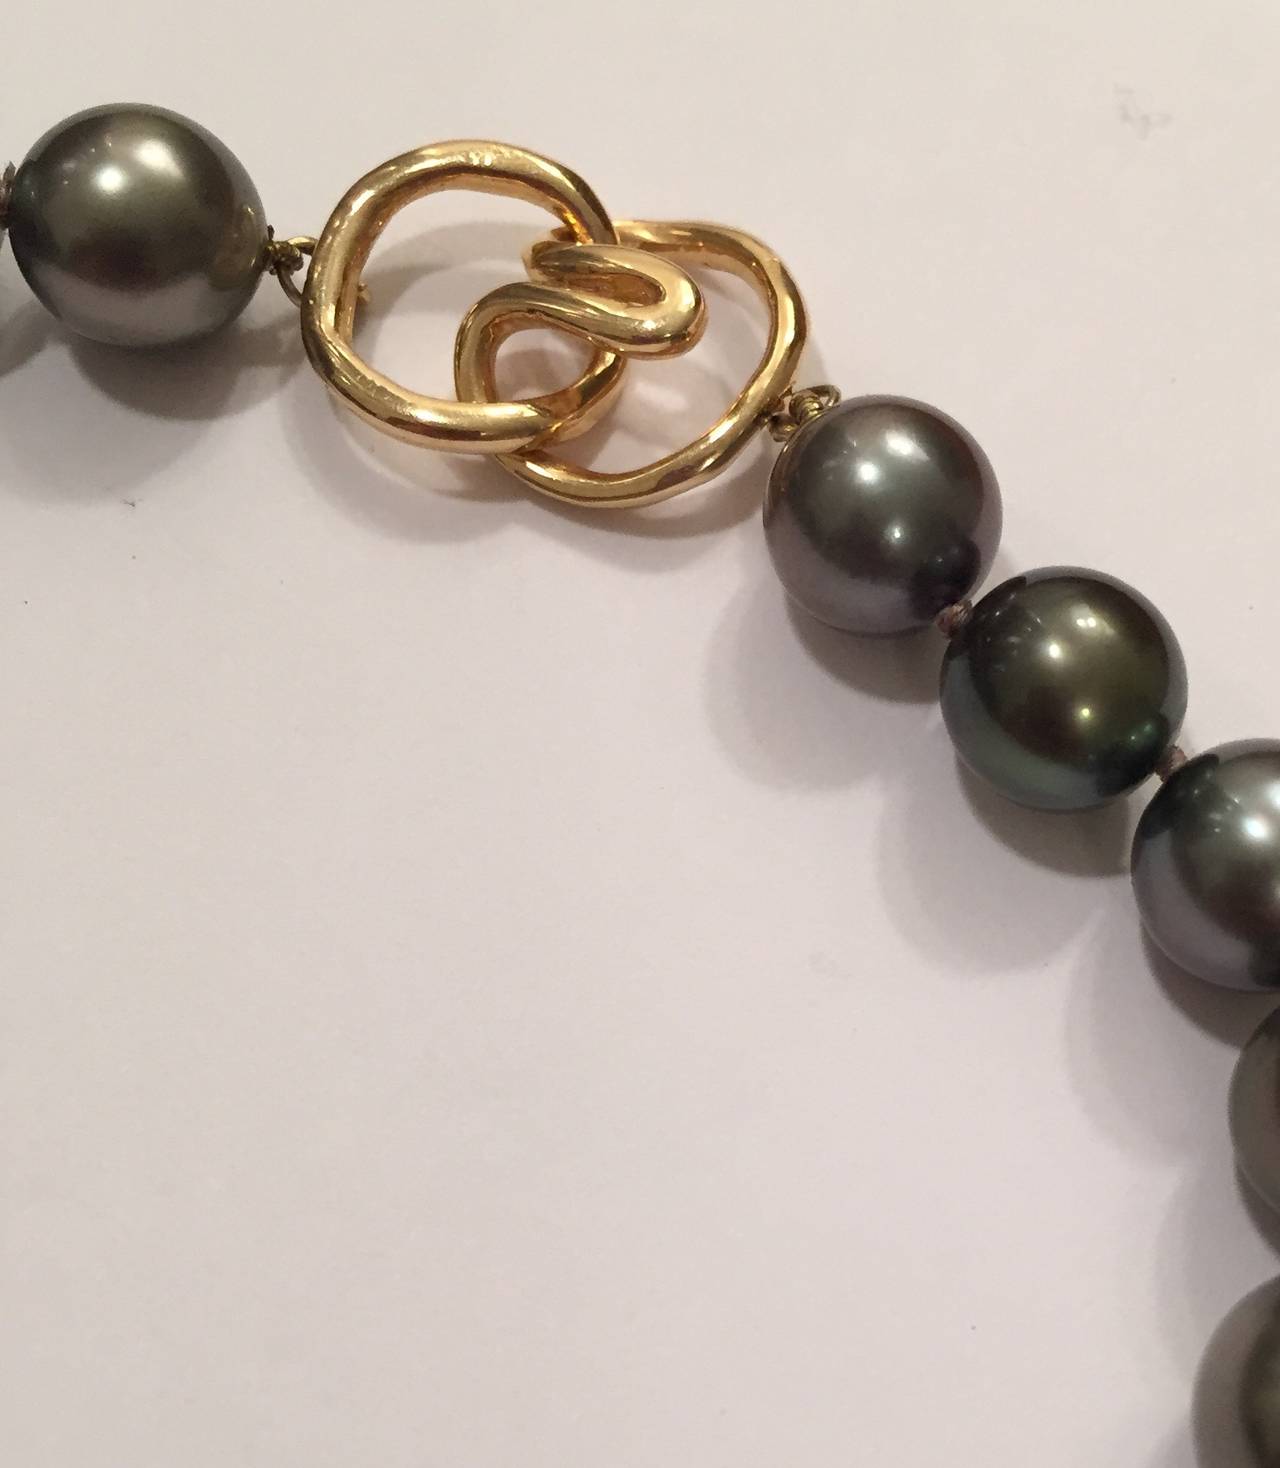 Elegant graduated Gray Cultured Pearl Necklace  finished with an 18kt Yellow Gold clap.  The pearls measure 8 x 12mm.

Please let me now if there are any other inquiries you may have.